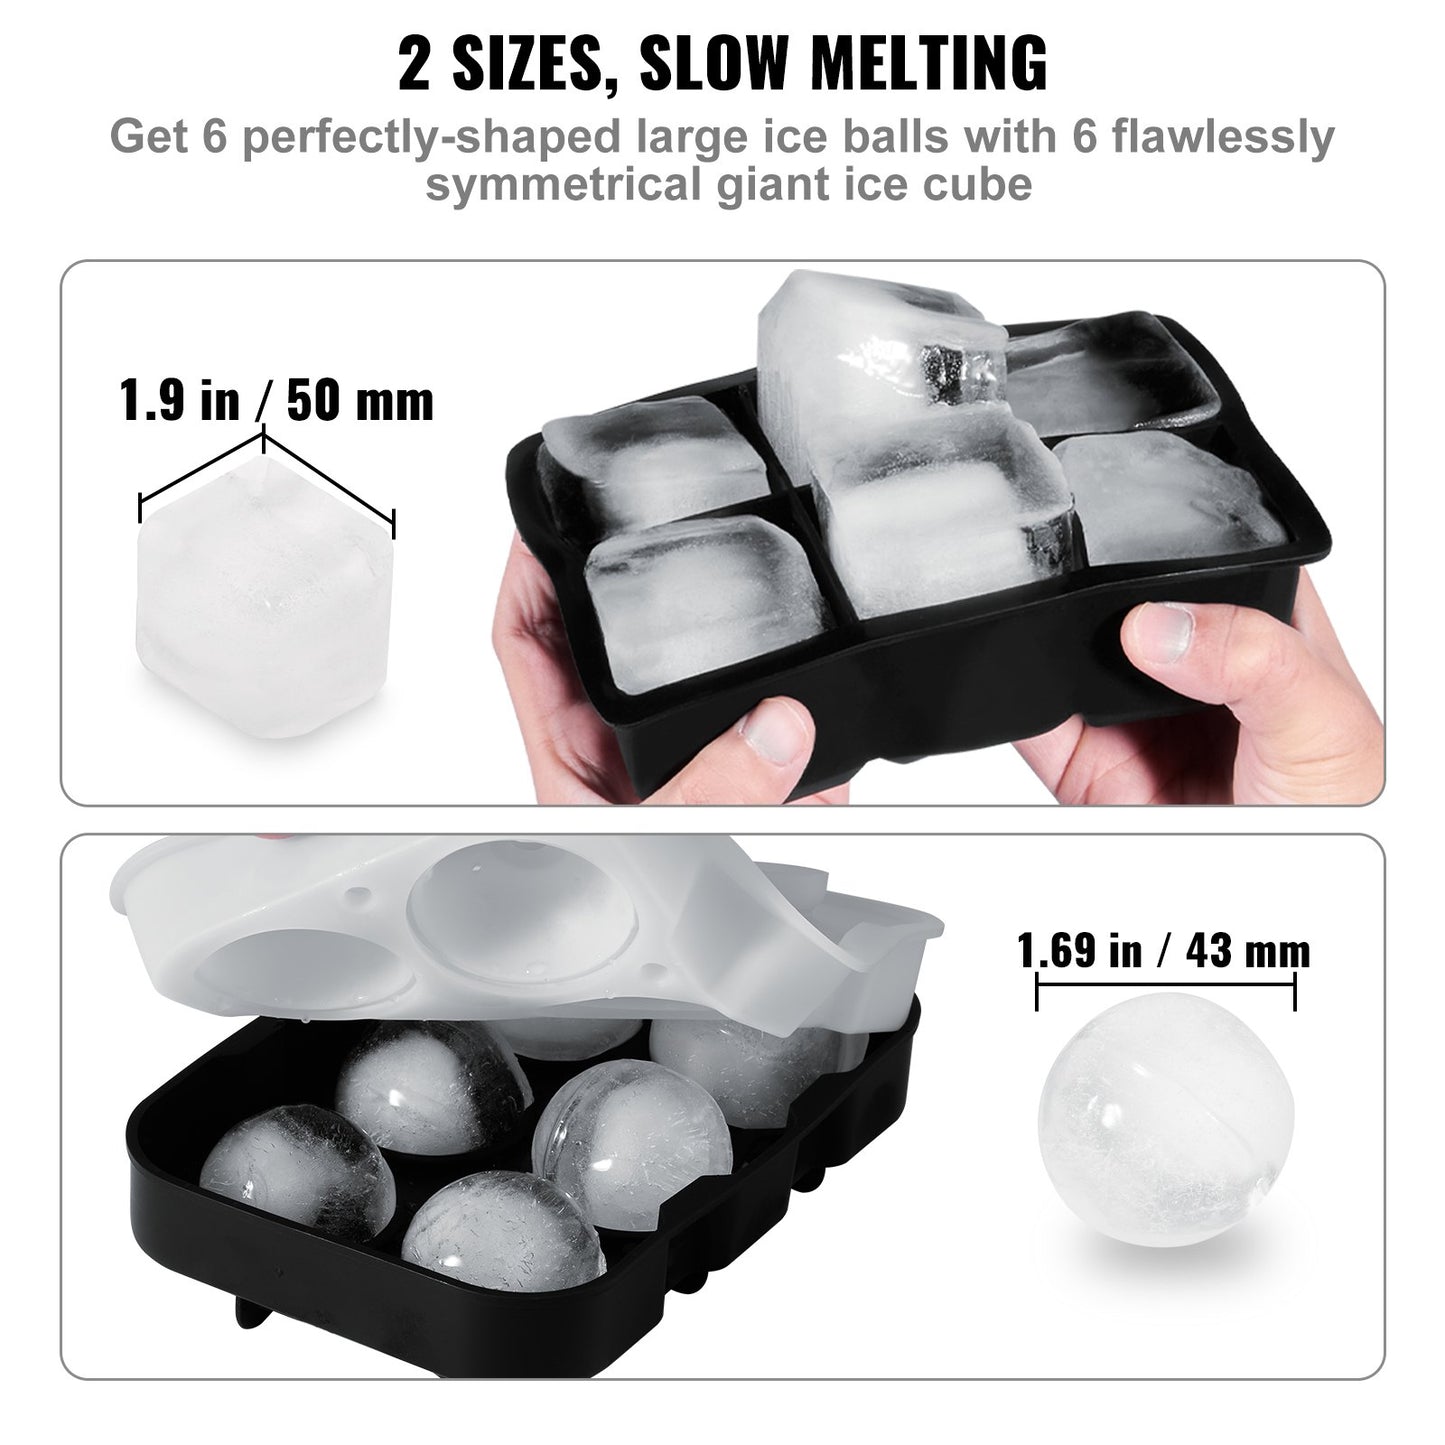 VEVOR Ice Cube Trays (Set of 2), 2-in-1 Combo with Silicone Sphere Ice Ball Maker & Large Square Ice Cube Maker with Lid, Reusable Easy Release BPA Free Ice Tray Set for Whiskey Cocktails Bourbon-1